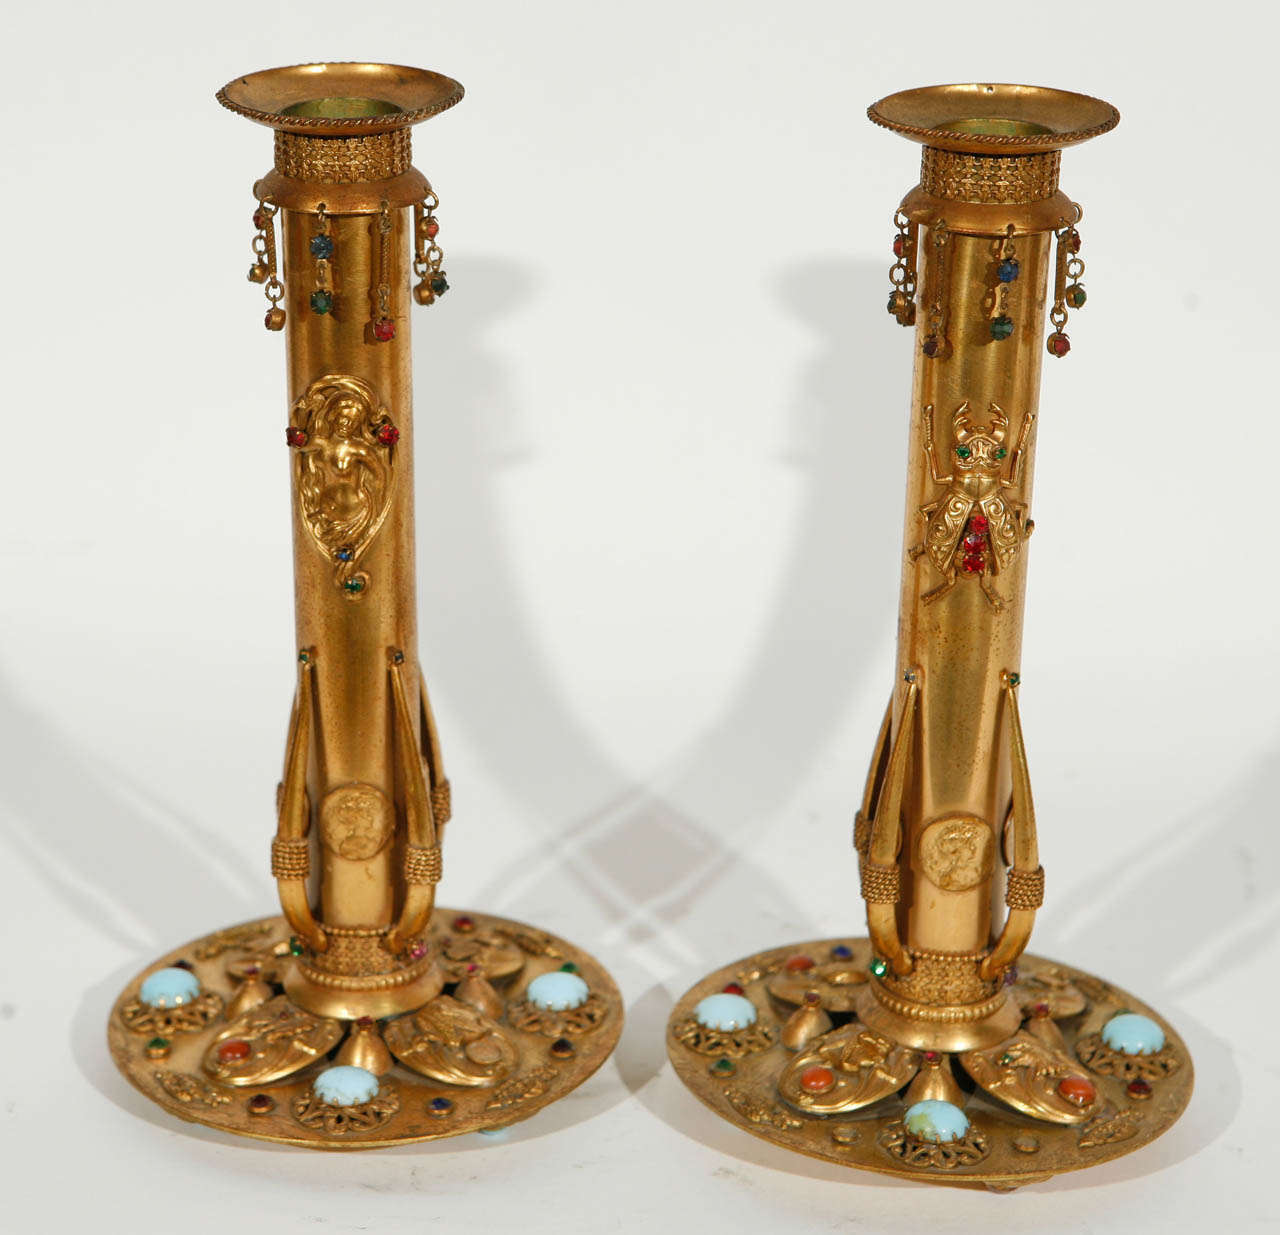 Pair of French Egyptian Revival  Bronze Stone Encrusted Candlesticks. The base diameter measurement is 4.5 inches.